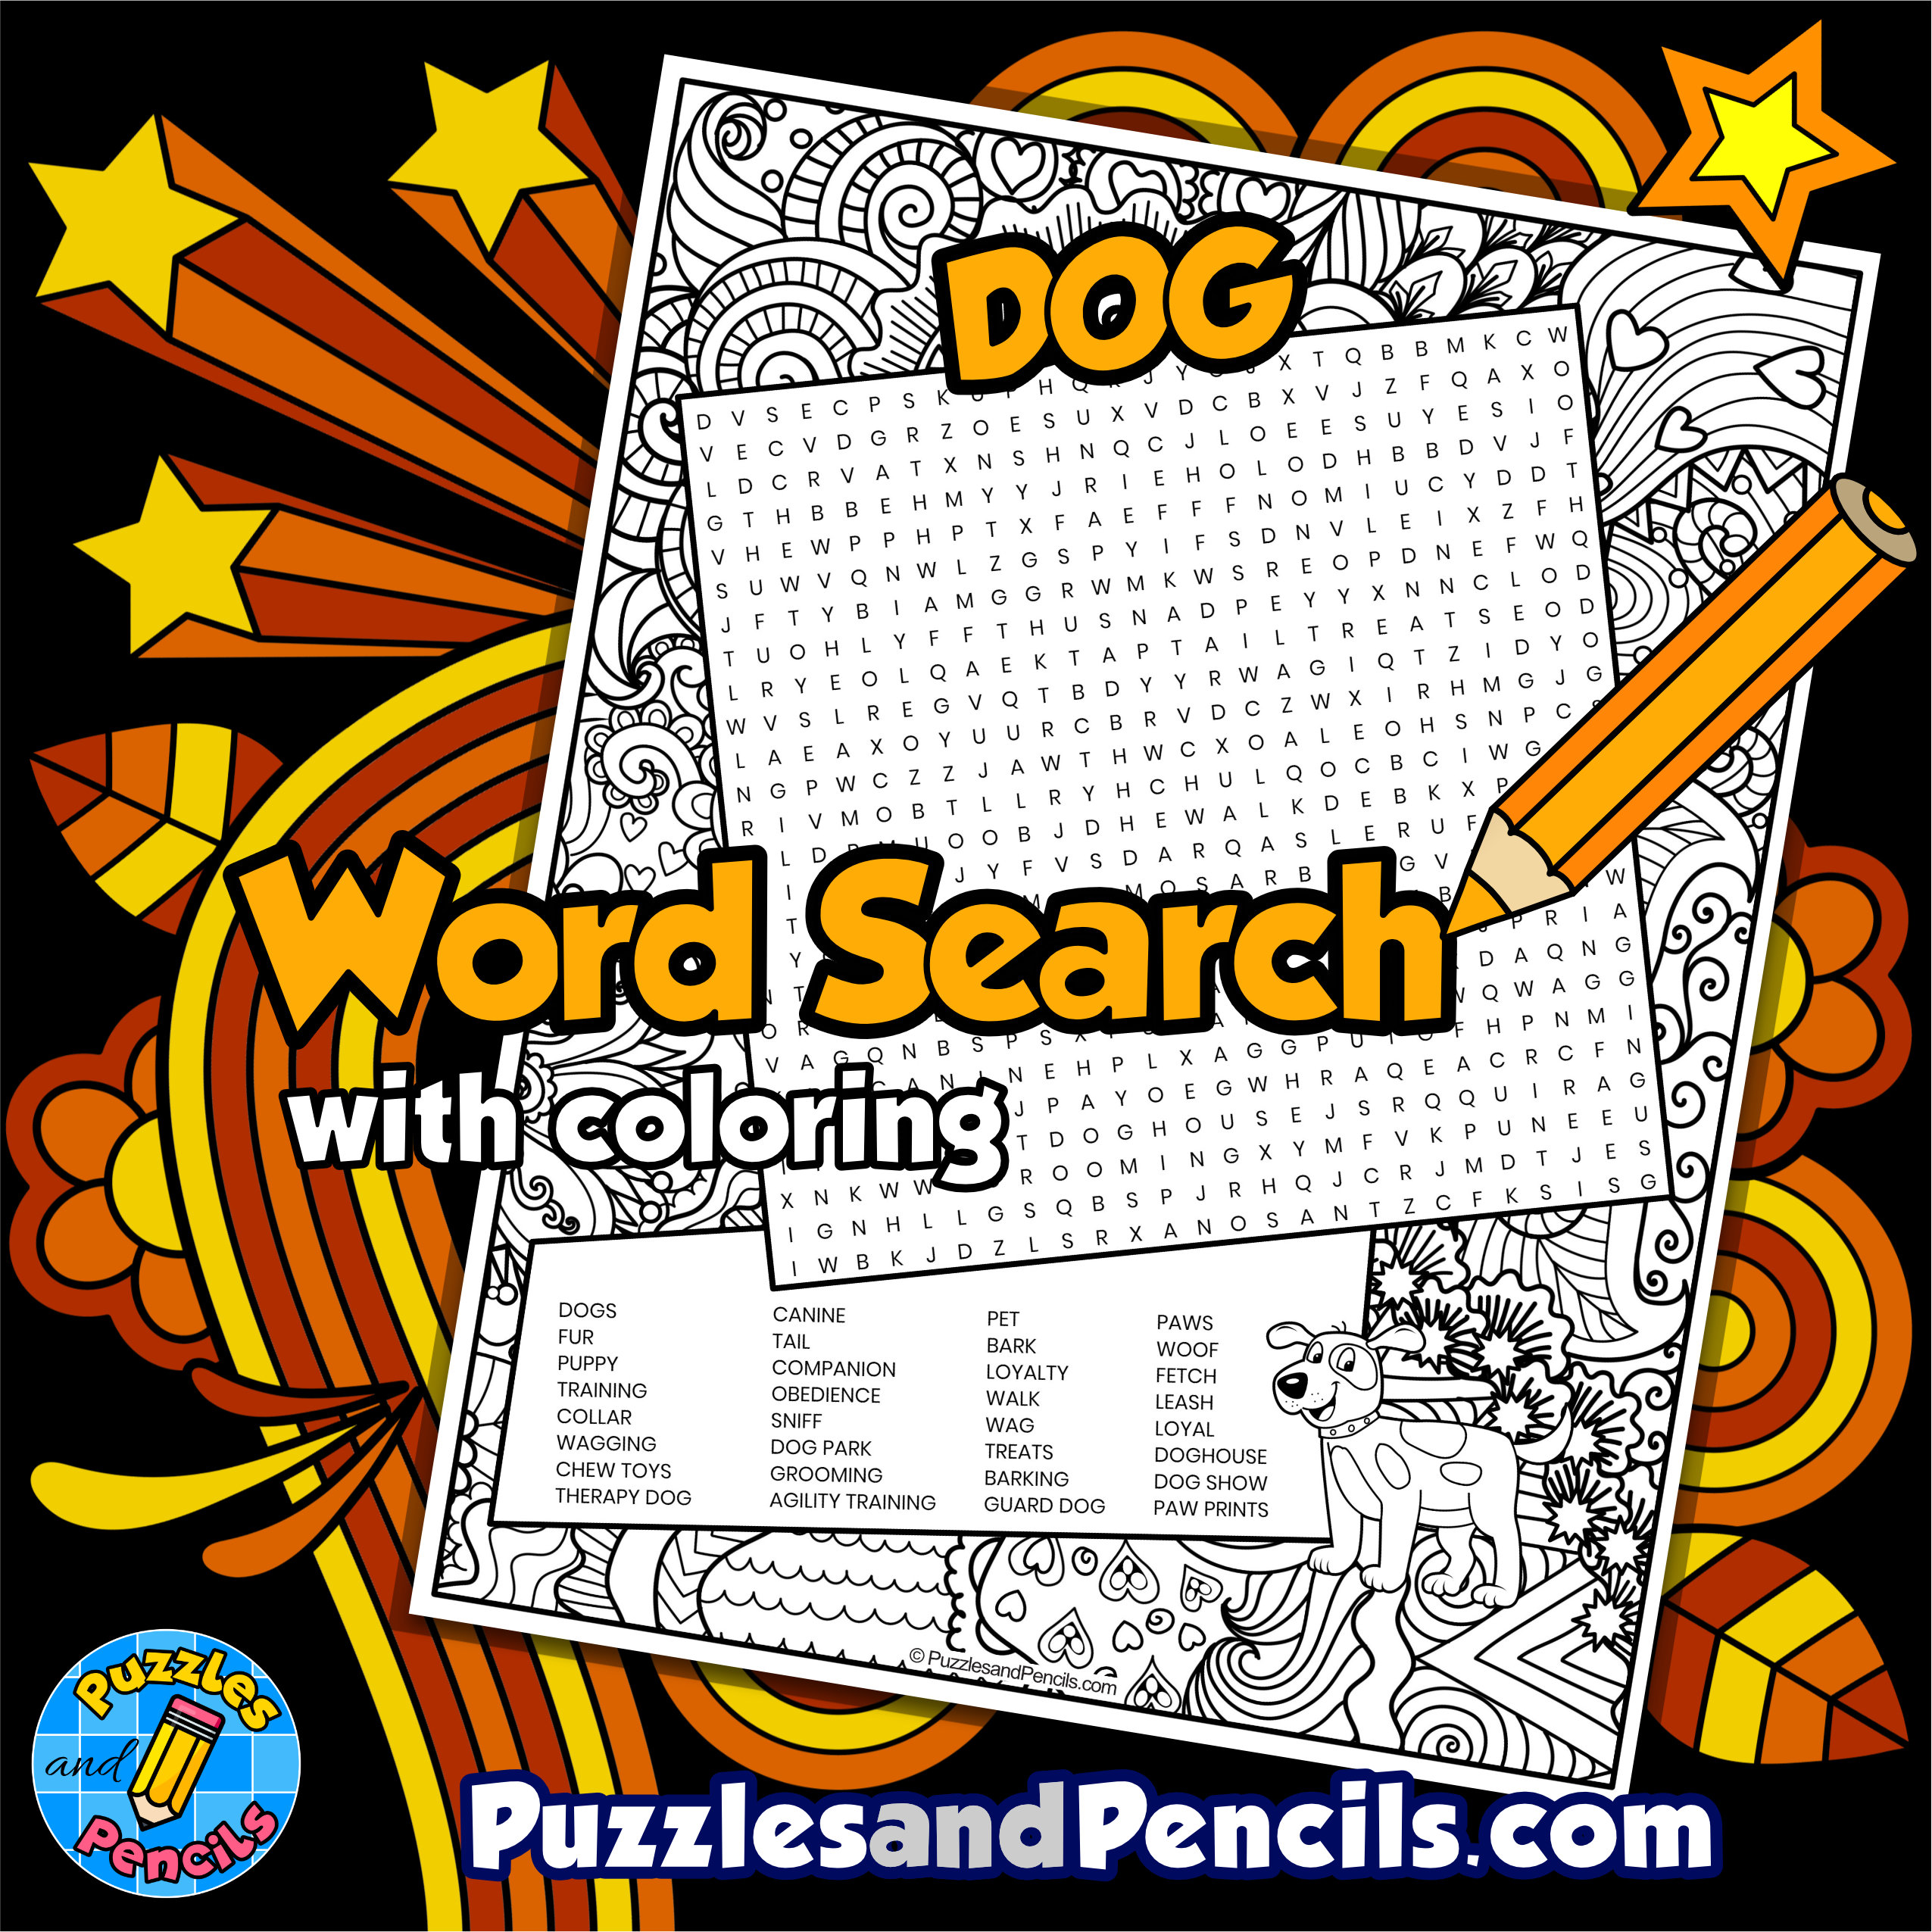 Dog word search puzzle with coloring wordsearch made by teachers